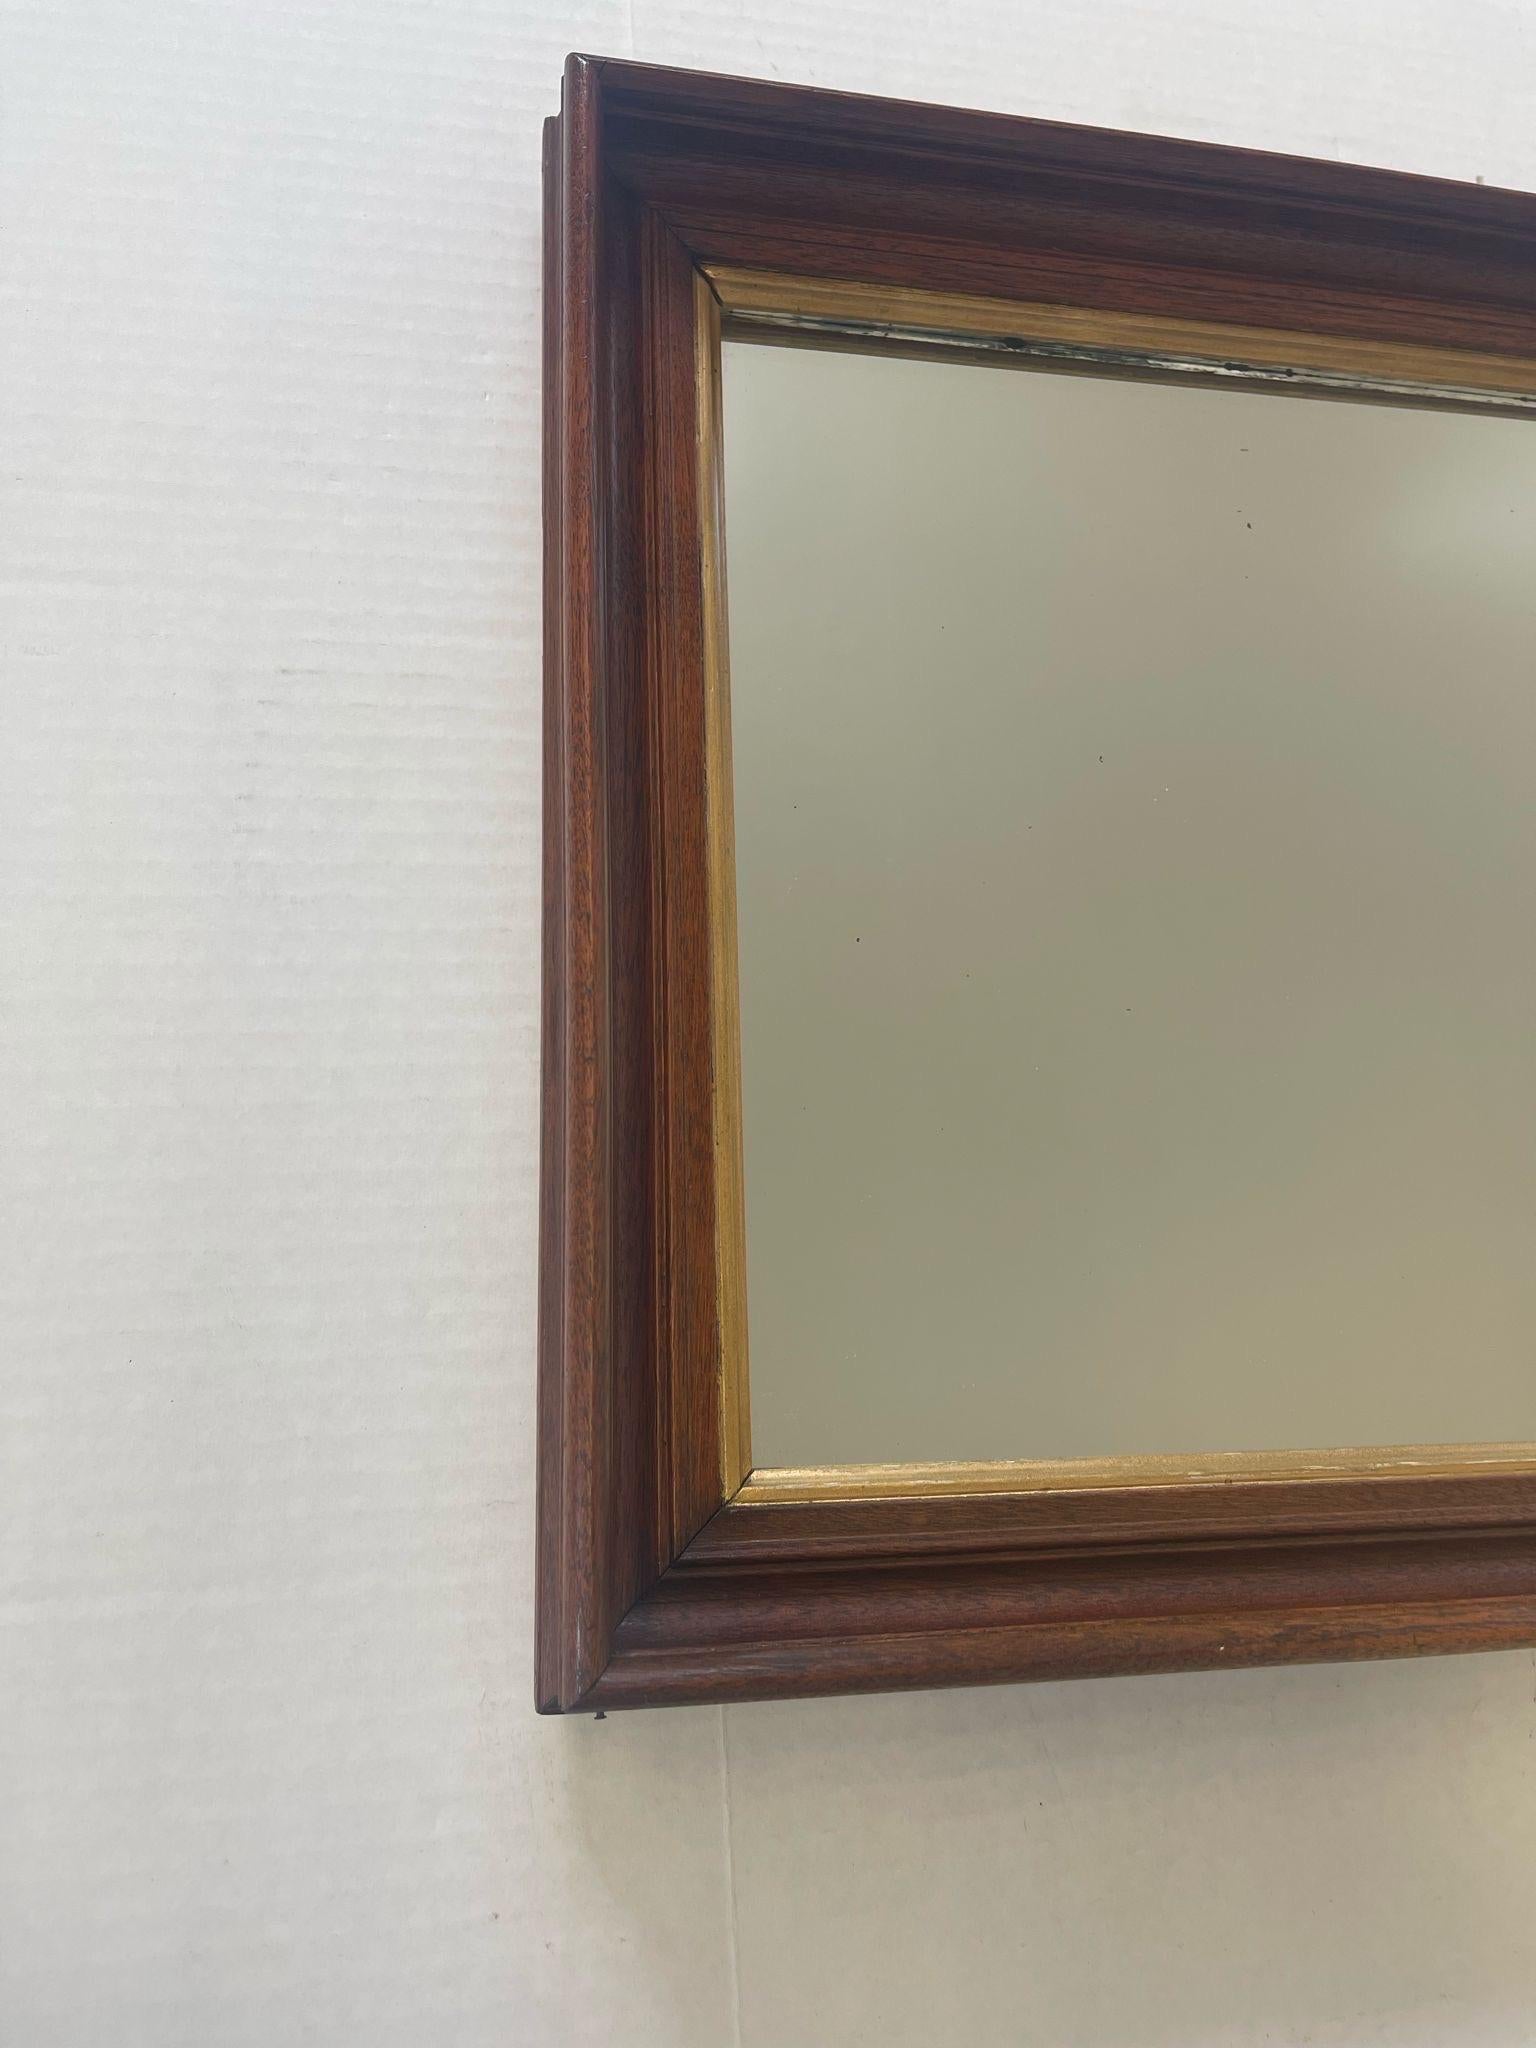 Glass Antique Style Wall Mirror With Wood Frame. For Sale